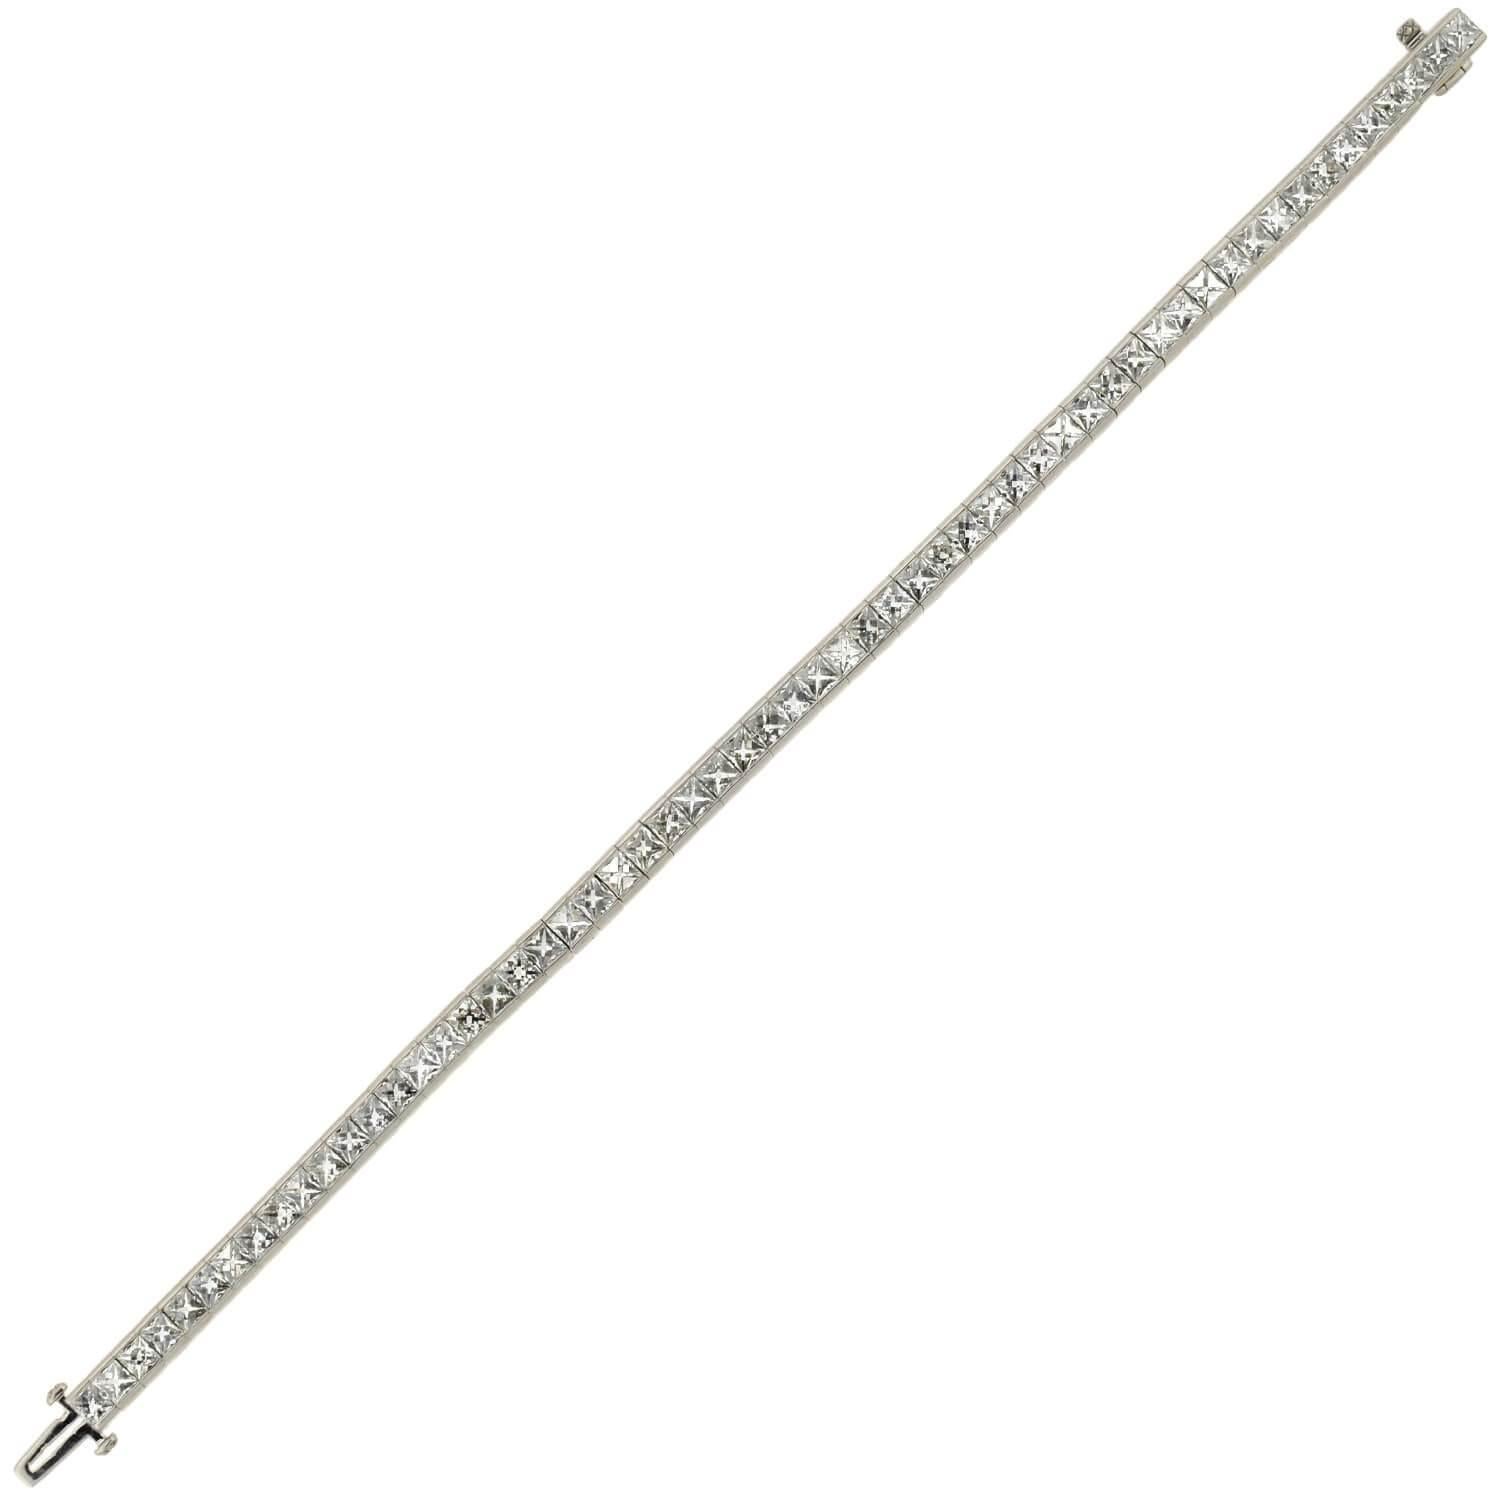 An absolutely exquisite Art Deco style diamond line bracelet! This stunning platinum piece features a row of 58 French Cut diamonds, which carry seamlessly around the wrist to create a stunning and flexible design. The sparkling stones exhibit D-F